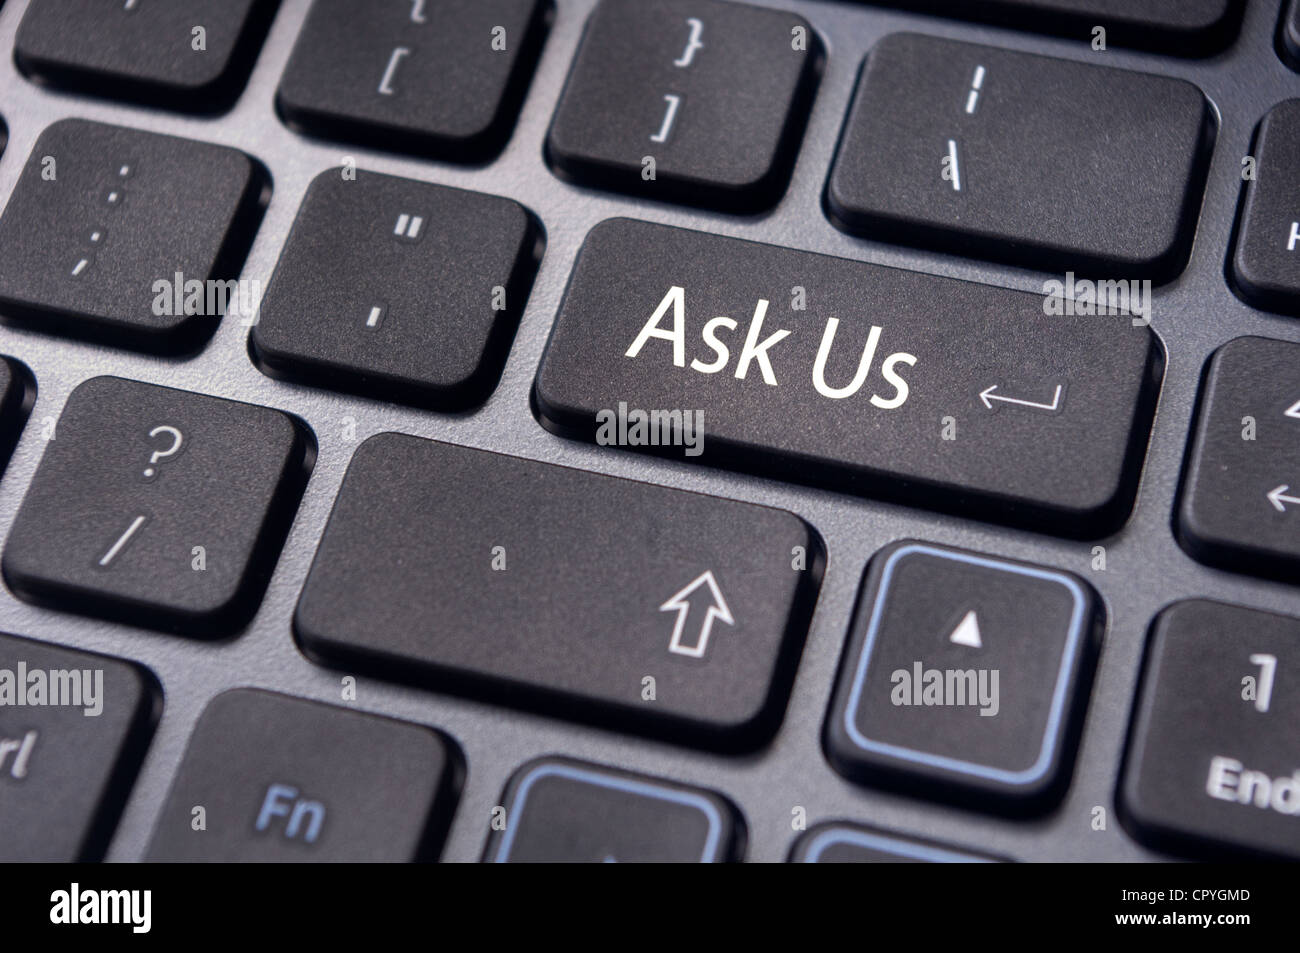 a message on keyboard enter key for 'ask us' concepts. Stock Photo